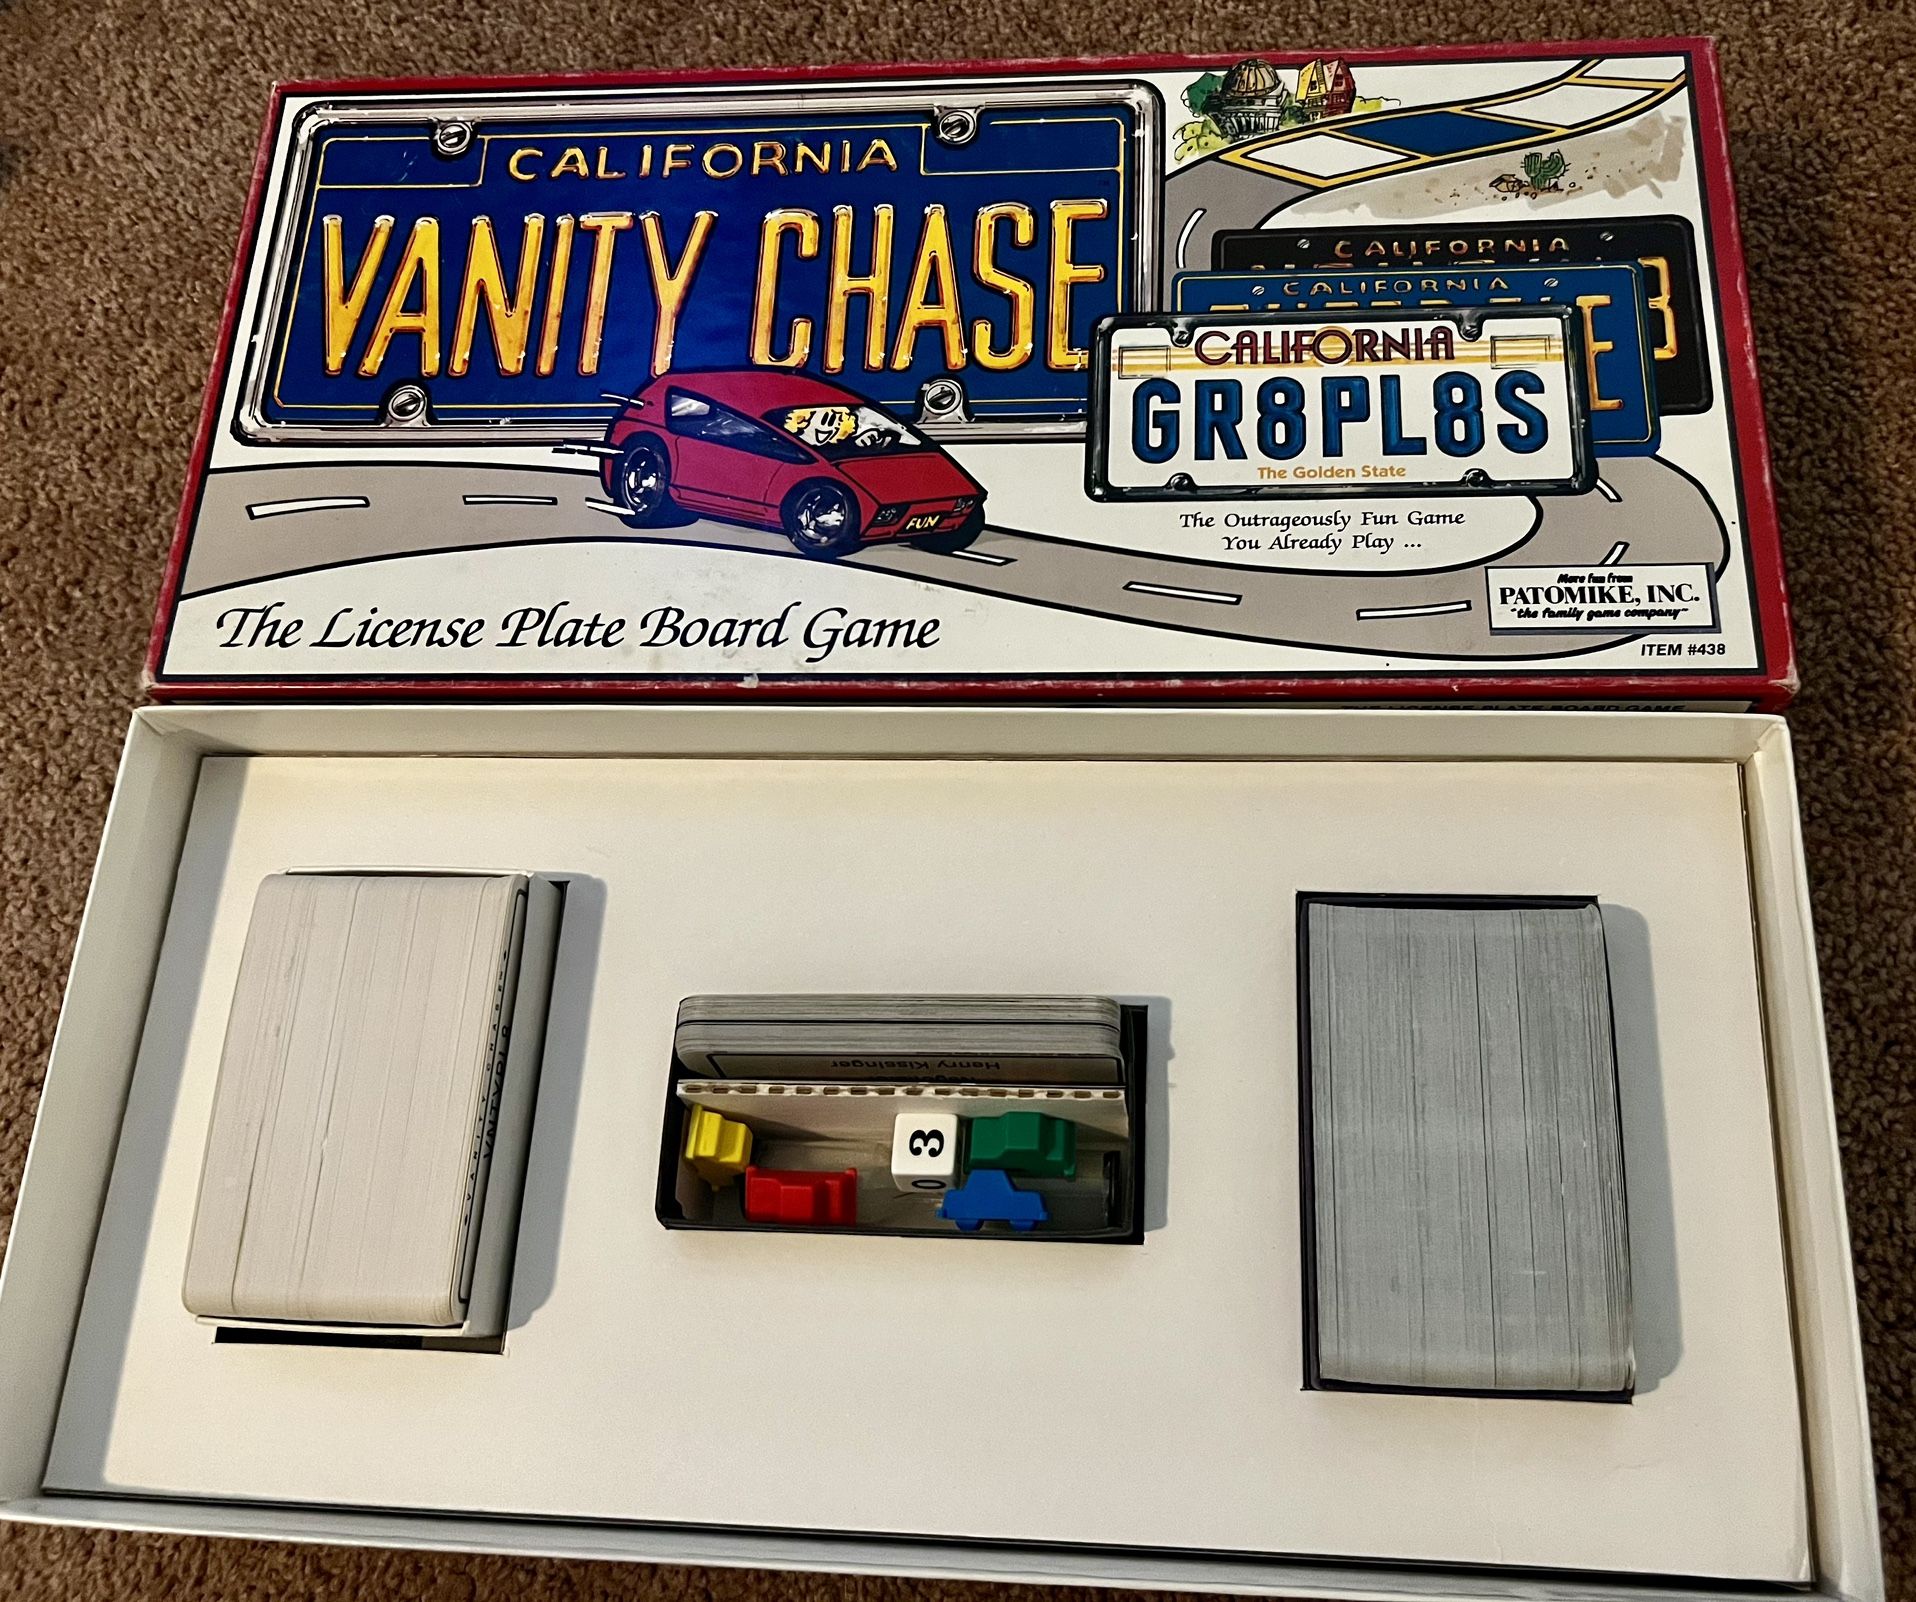 New in Box Vintage 1988 California Vanity Chase License Plate Board Game